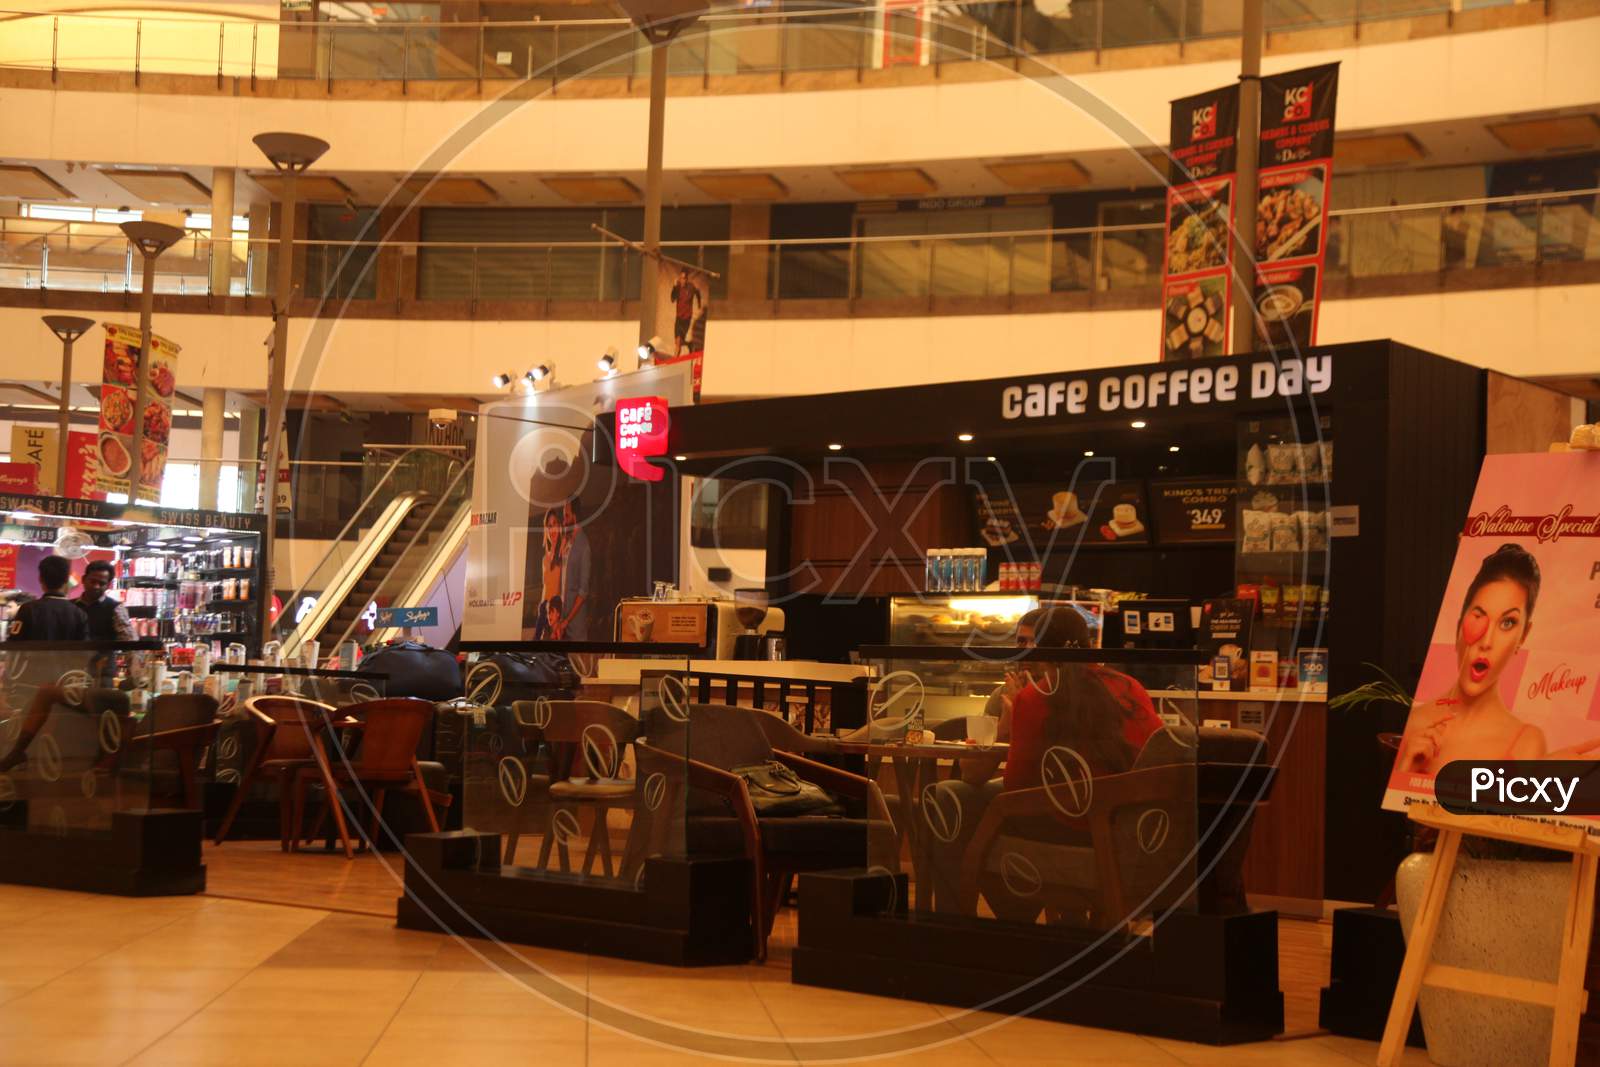 Cafe Coffee Day Stall inside a Mall